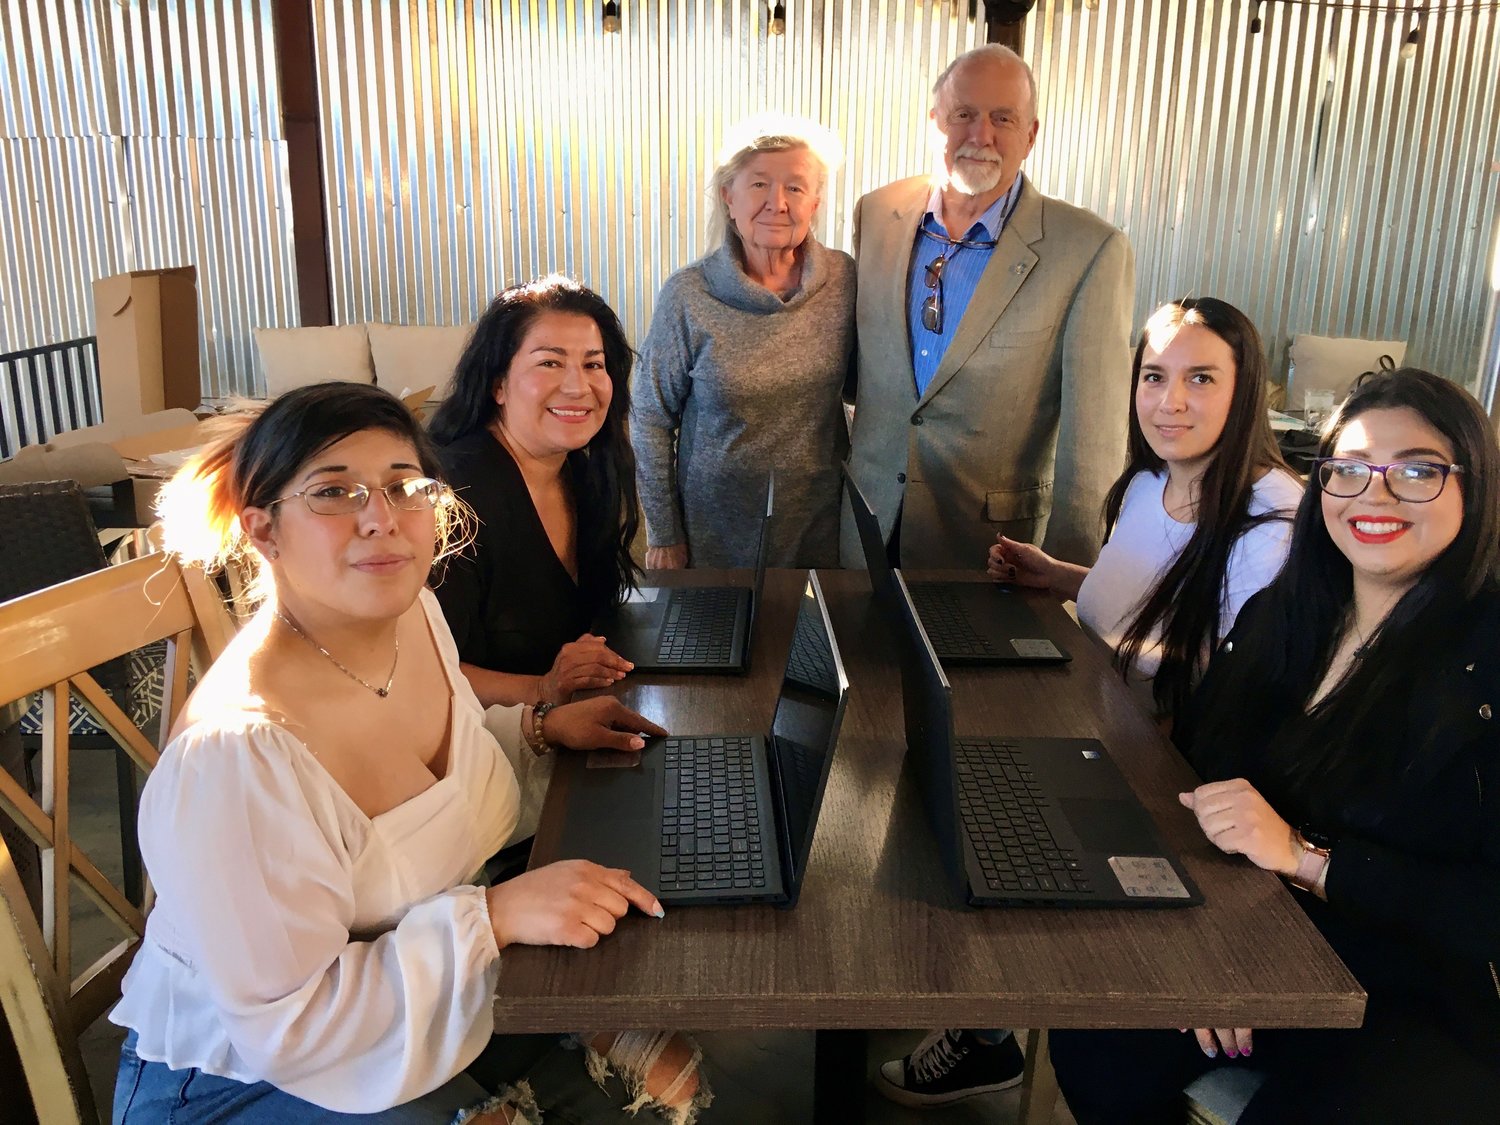 Four Live Your Dream Awardees from southern New Mexico and far West Texas check are, seated left to right, Lauren Rosales, Alex Sosa, Debbie Cantu and Victoria Trujillo. Standing are Doña Ana County Commissioner Shannon Reynolds and his wife, Maggie.